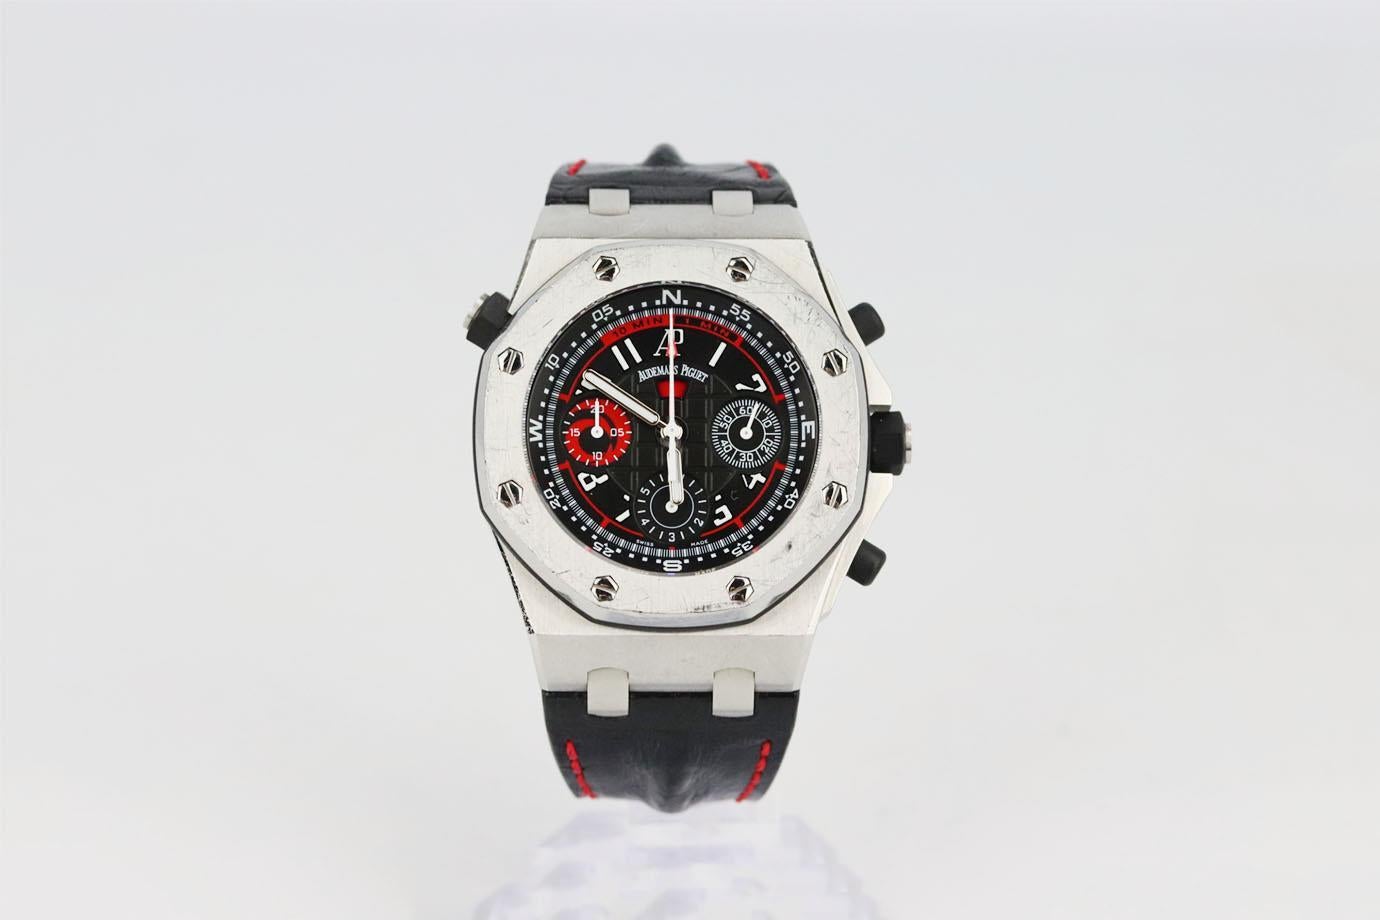 Audemars Piguet Royal Oak Offshore Chronograph 42mm Alinghi Polaris Wrist Watch. This ’Royal Oak’ 42mm watch by Audemar Piguet has been crafted at the brand's Swiss atelier from steel with an intricate automatic movement and has a black dial and